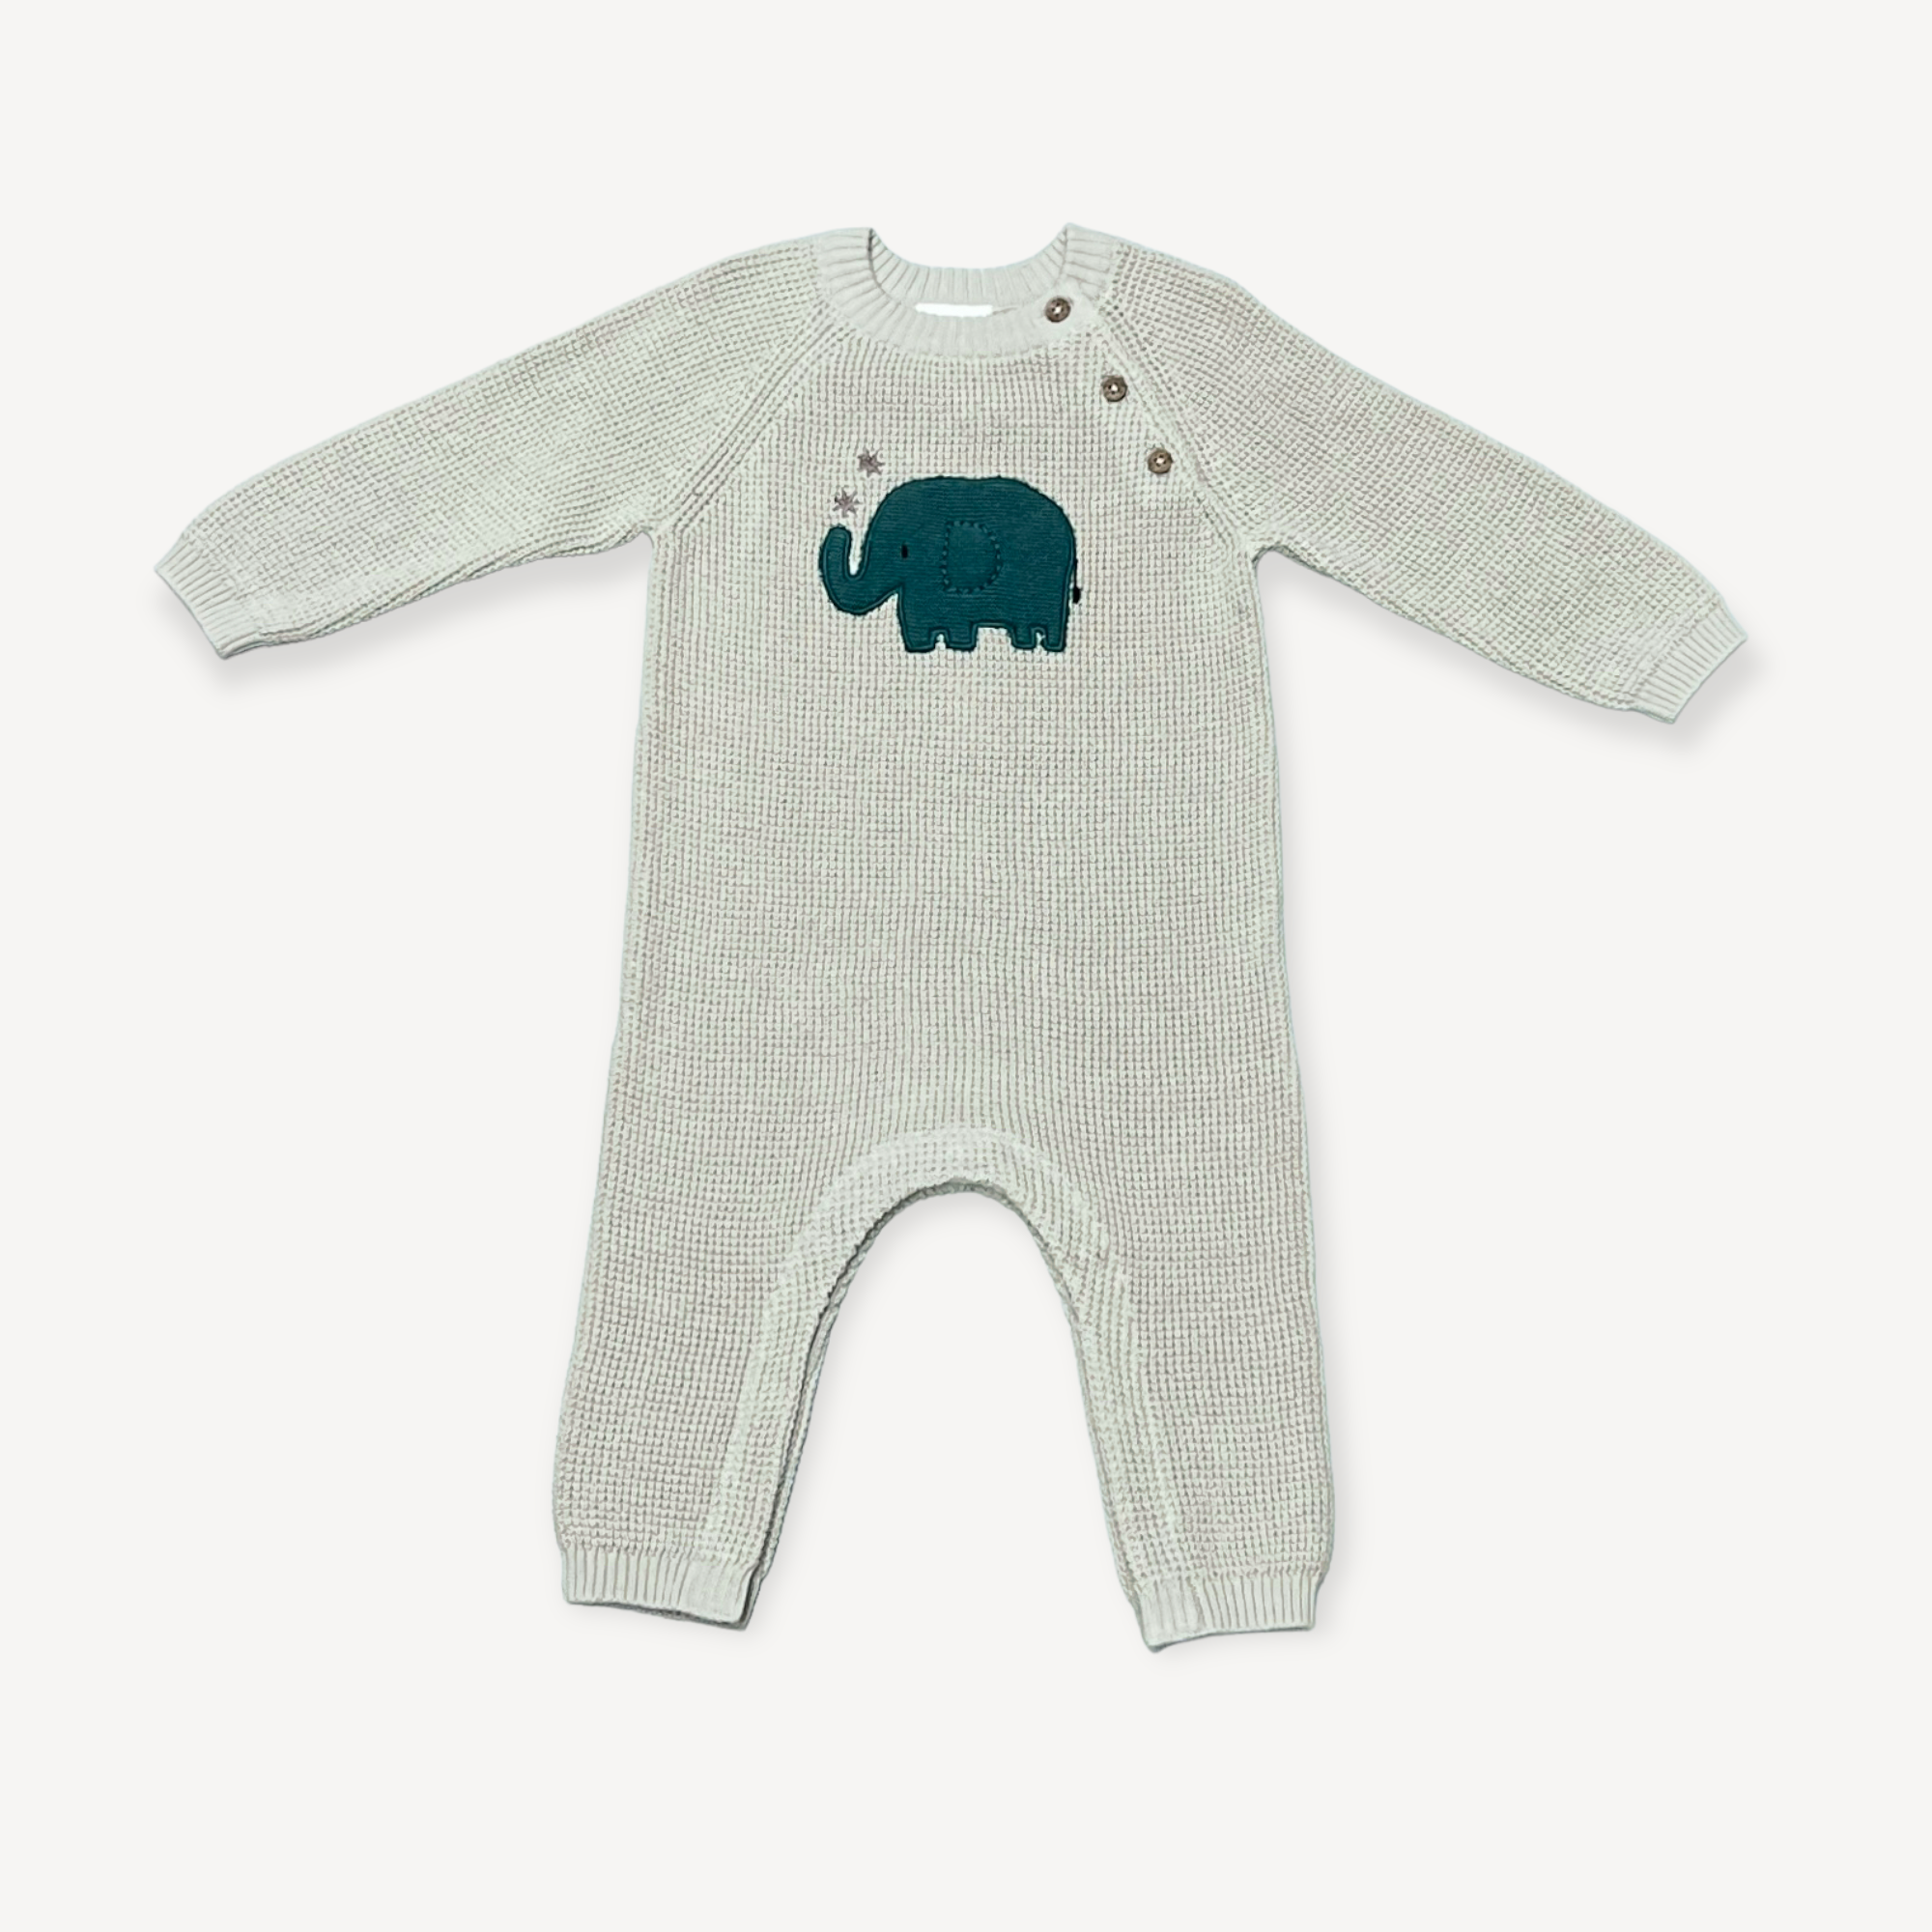 Wrap your little one in comfort and style with our Elephant Jacquard Knit Baby Jumpsuit. Made with breathable organic cotton, this chunky knit coverall romper keeps your baby cozy in any season. The fun elephant embroidery adds a playful touch, while the button closure makes dressing and changing a breeze.  Machine washable. Eco-friendly, chemical free, non-toxic, pure, natural & organic. Ethically produced in India, supporting better livelihoods for small grower farmers. 